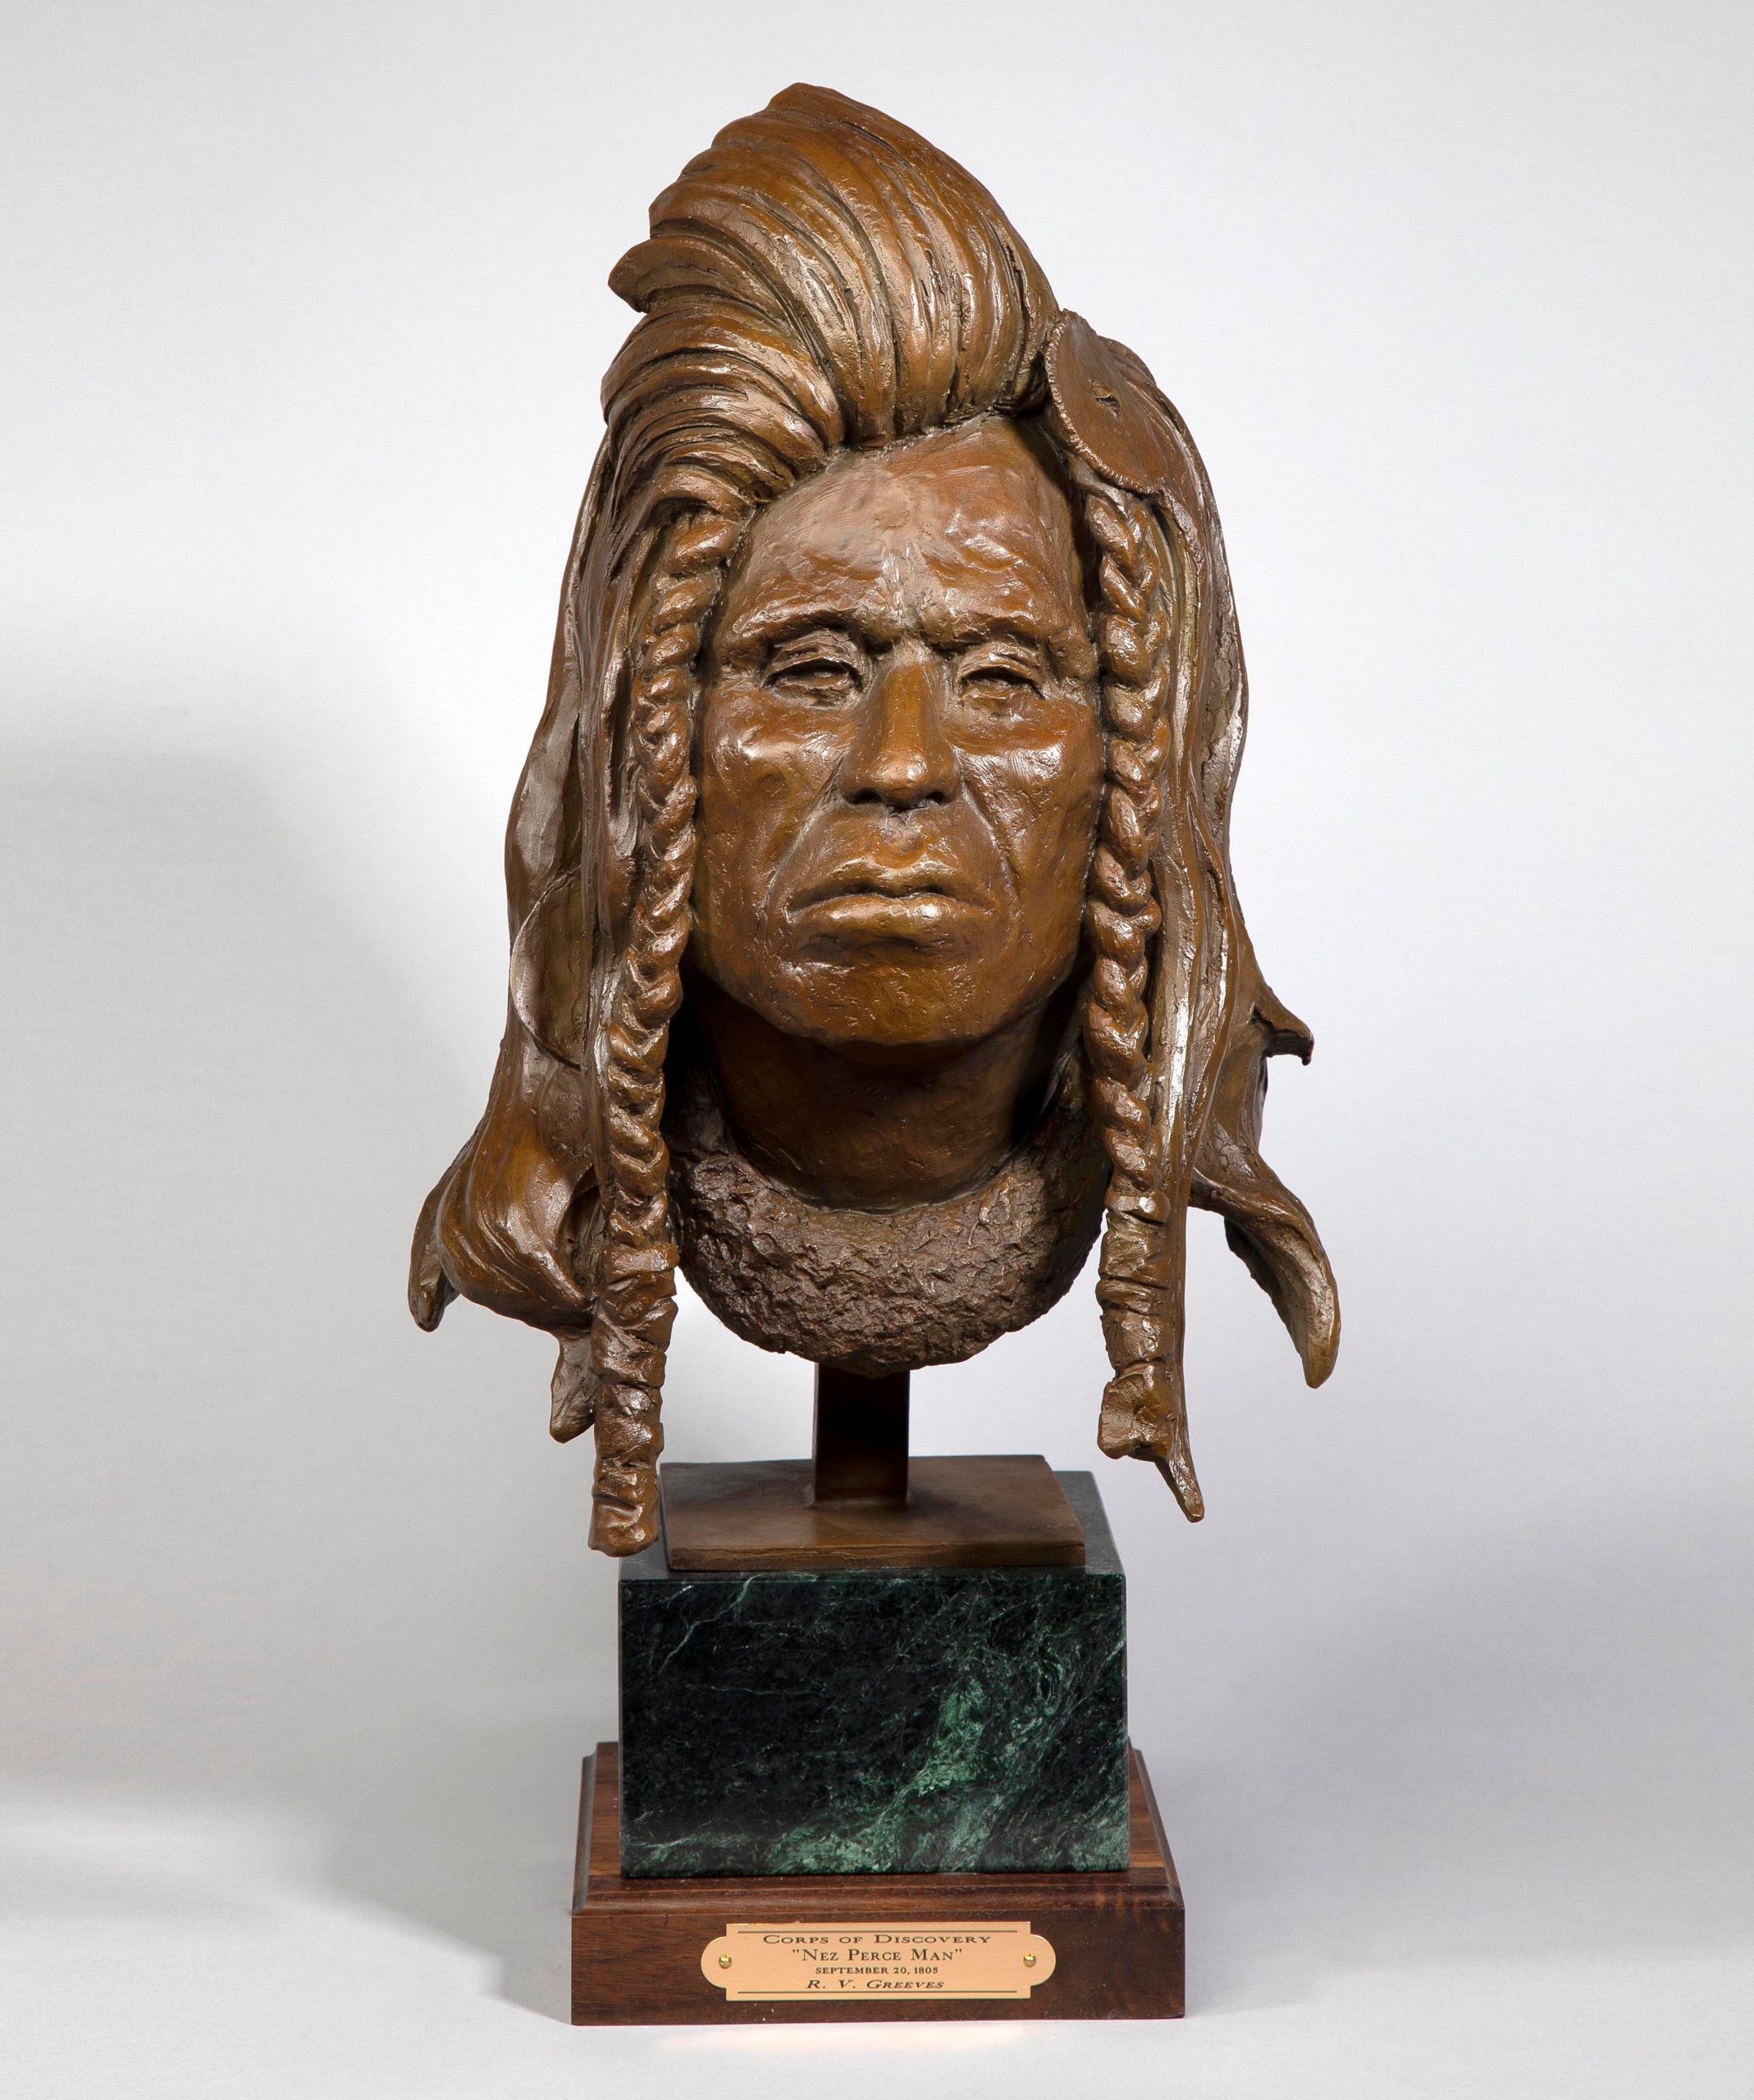 

											Richard V. Greeves </b>

											<em>
												 Lewis & Clark, Corp of Discovery, 1804-1806: The Native Peoples Lewis & Clark Encountered on their Epic Journey</em> 

											<h4>
												August 6 - October 30, 2021											</h4>

		                																																													<i>Nez Perce Man,</i>  
																																																					bronze, 
																																								19 x 9 1/2 x 9 inches 
																								
		                				